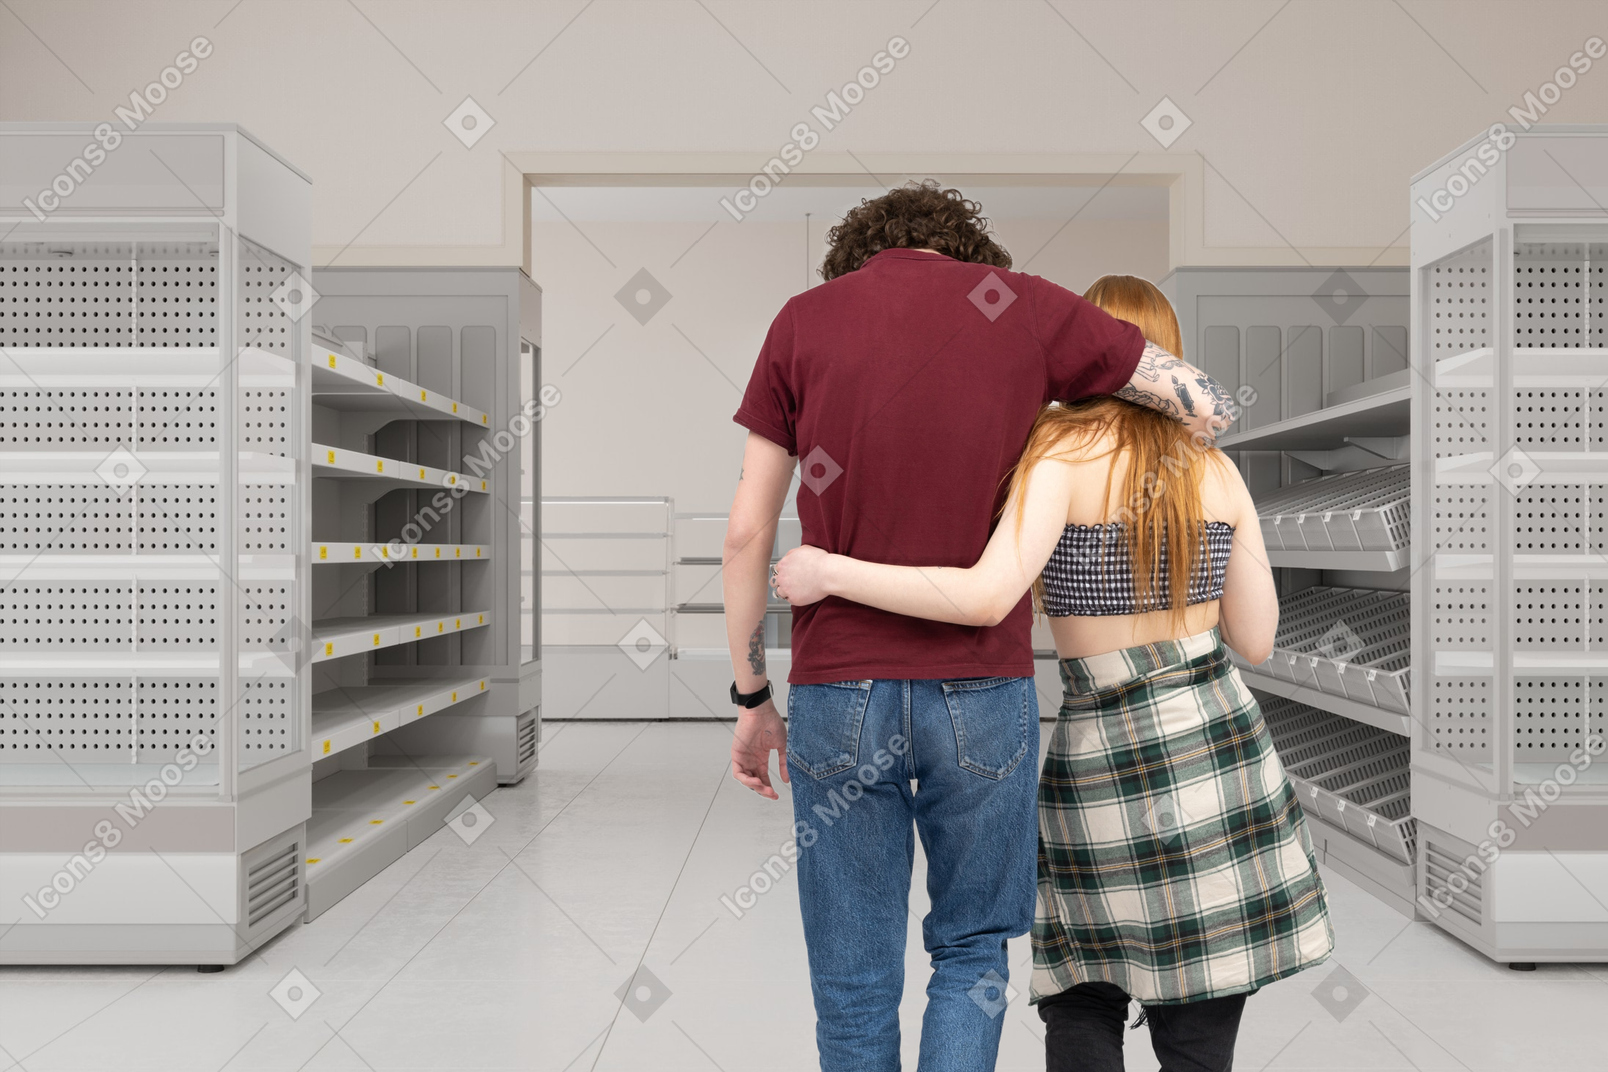 Young couple walking around the supermarket